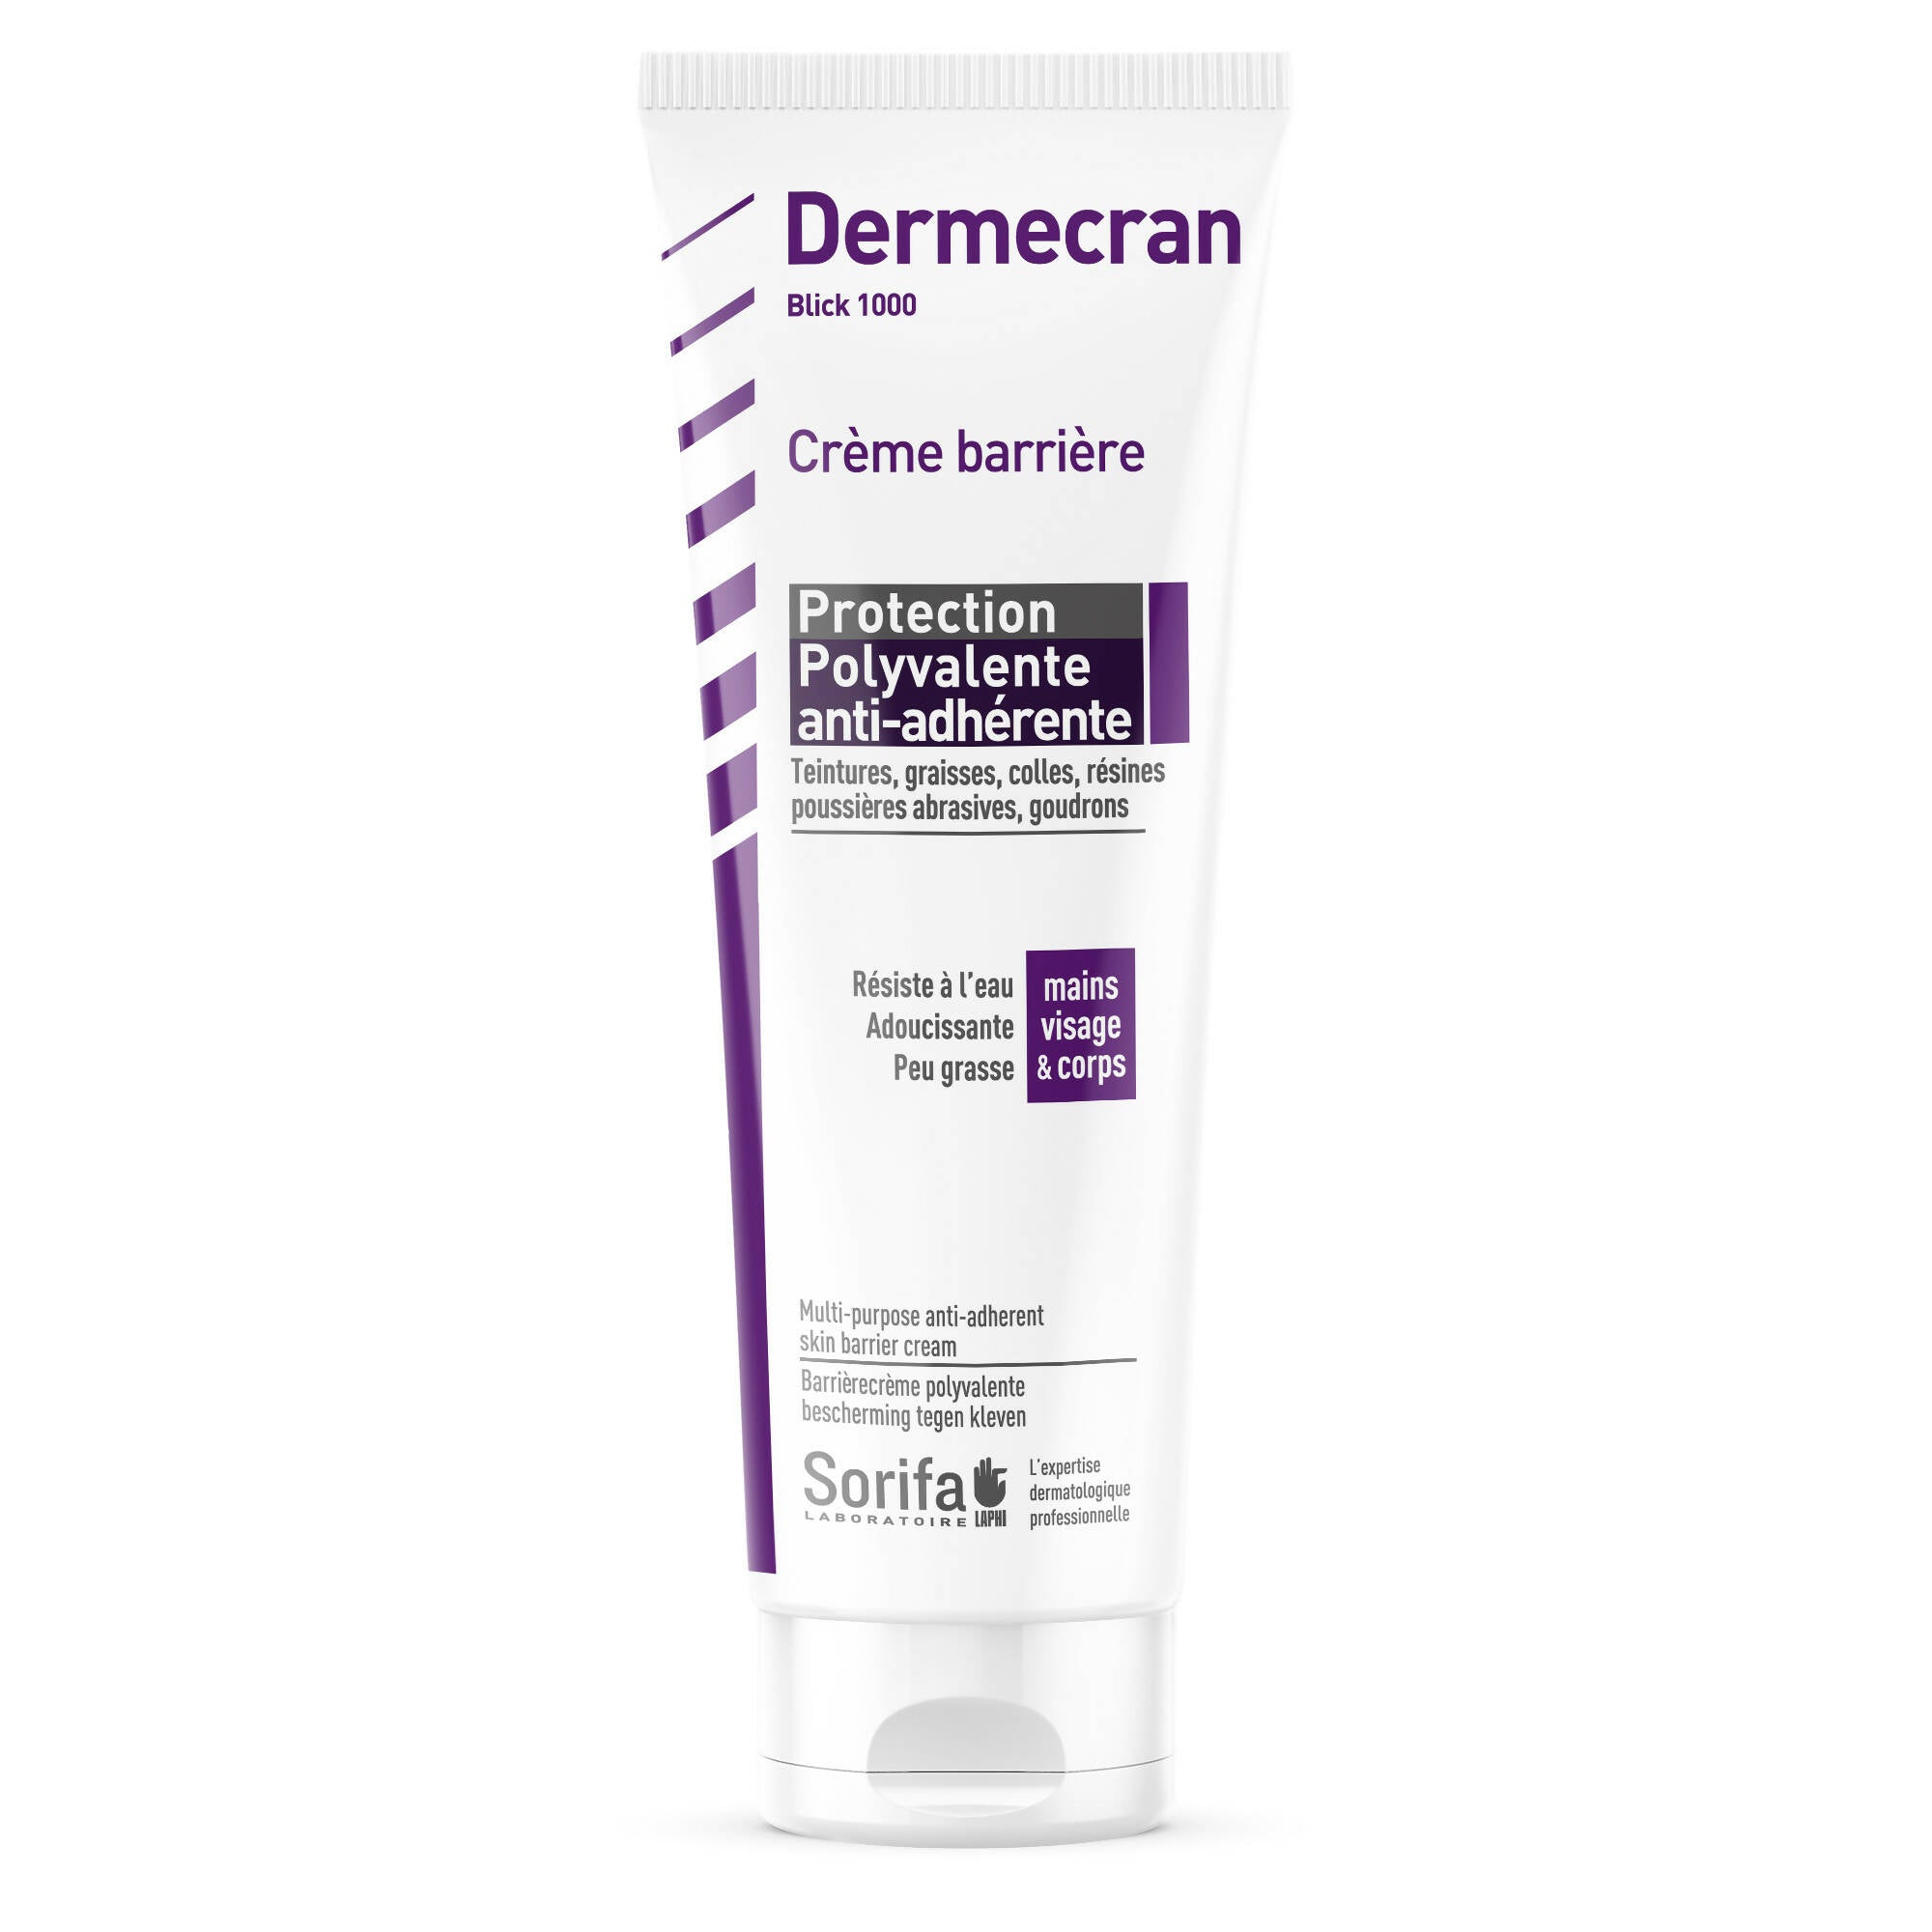 SORIFA - Set of 3 - Dermscreen - Barrier Cream - Multipurpose ANTI-ADHERENT protection / Blick 1000 - Hands, face and body - High tolerance - Fragrance-free - Tube 125 ml. - 0